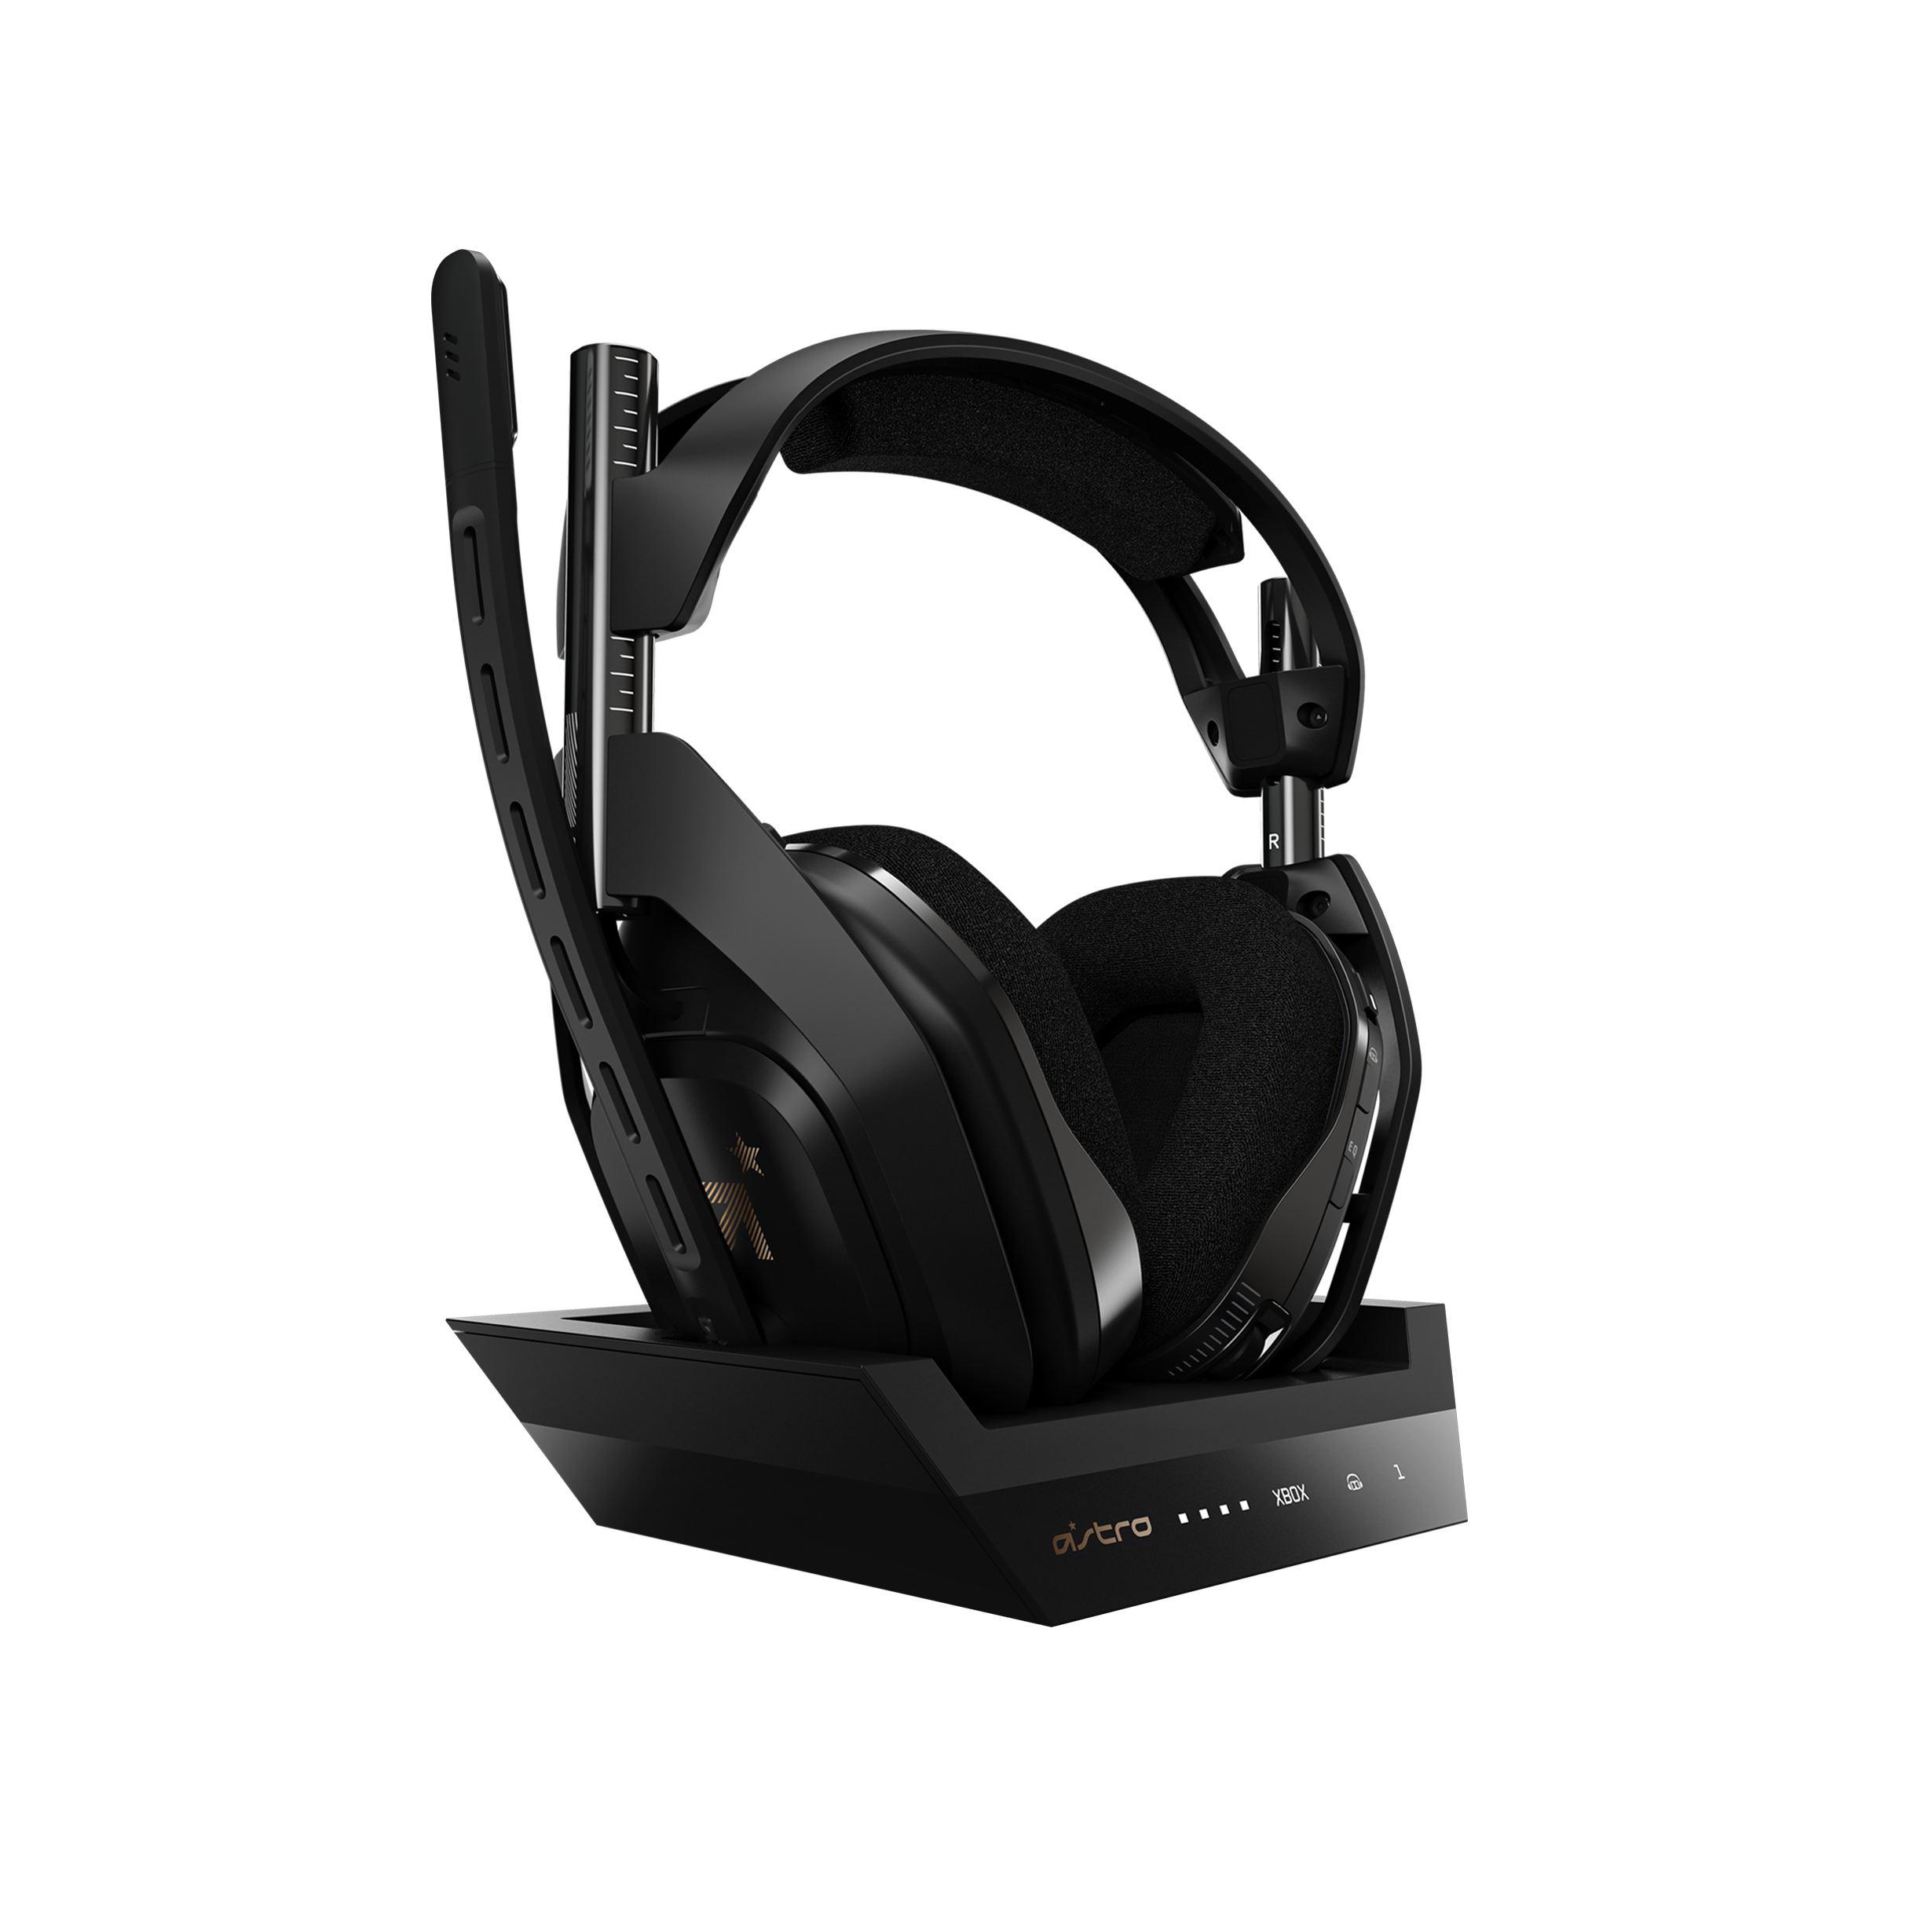 Logitech Astro A50 Wireless Gaming Headset and Base Station for Xbox and PC/MAC